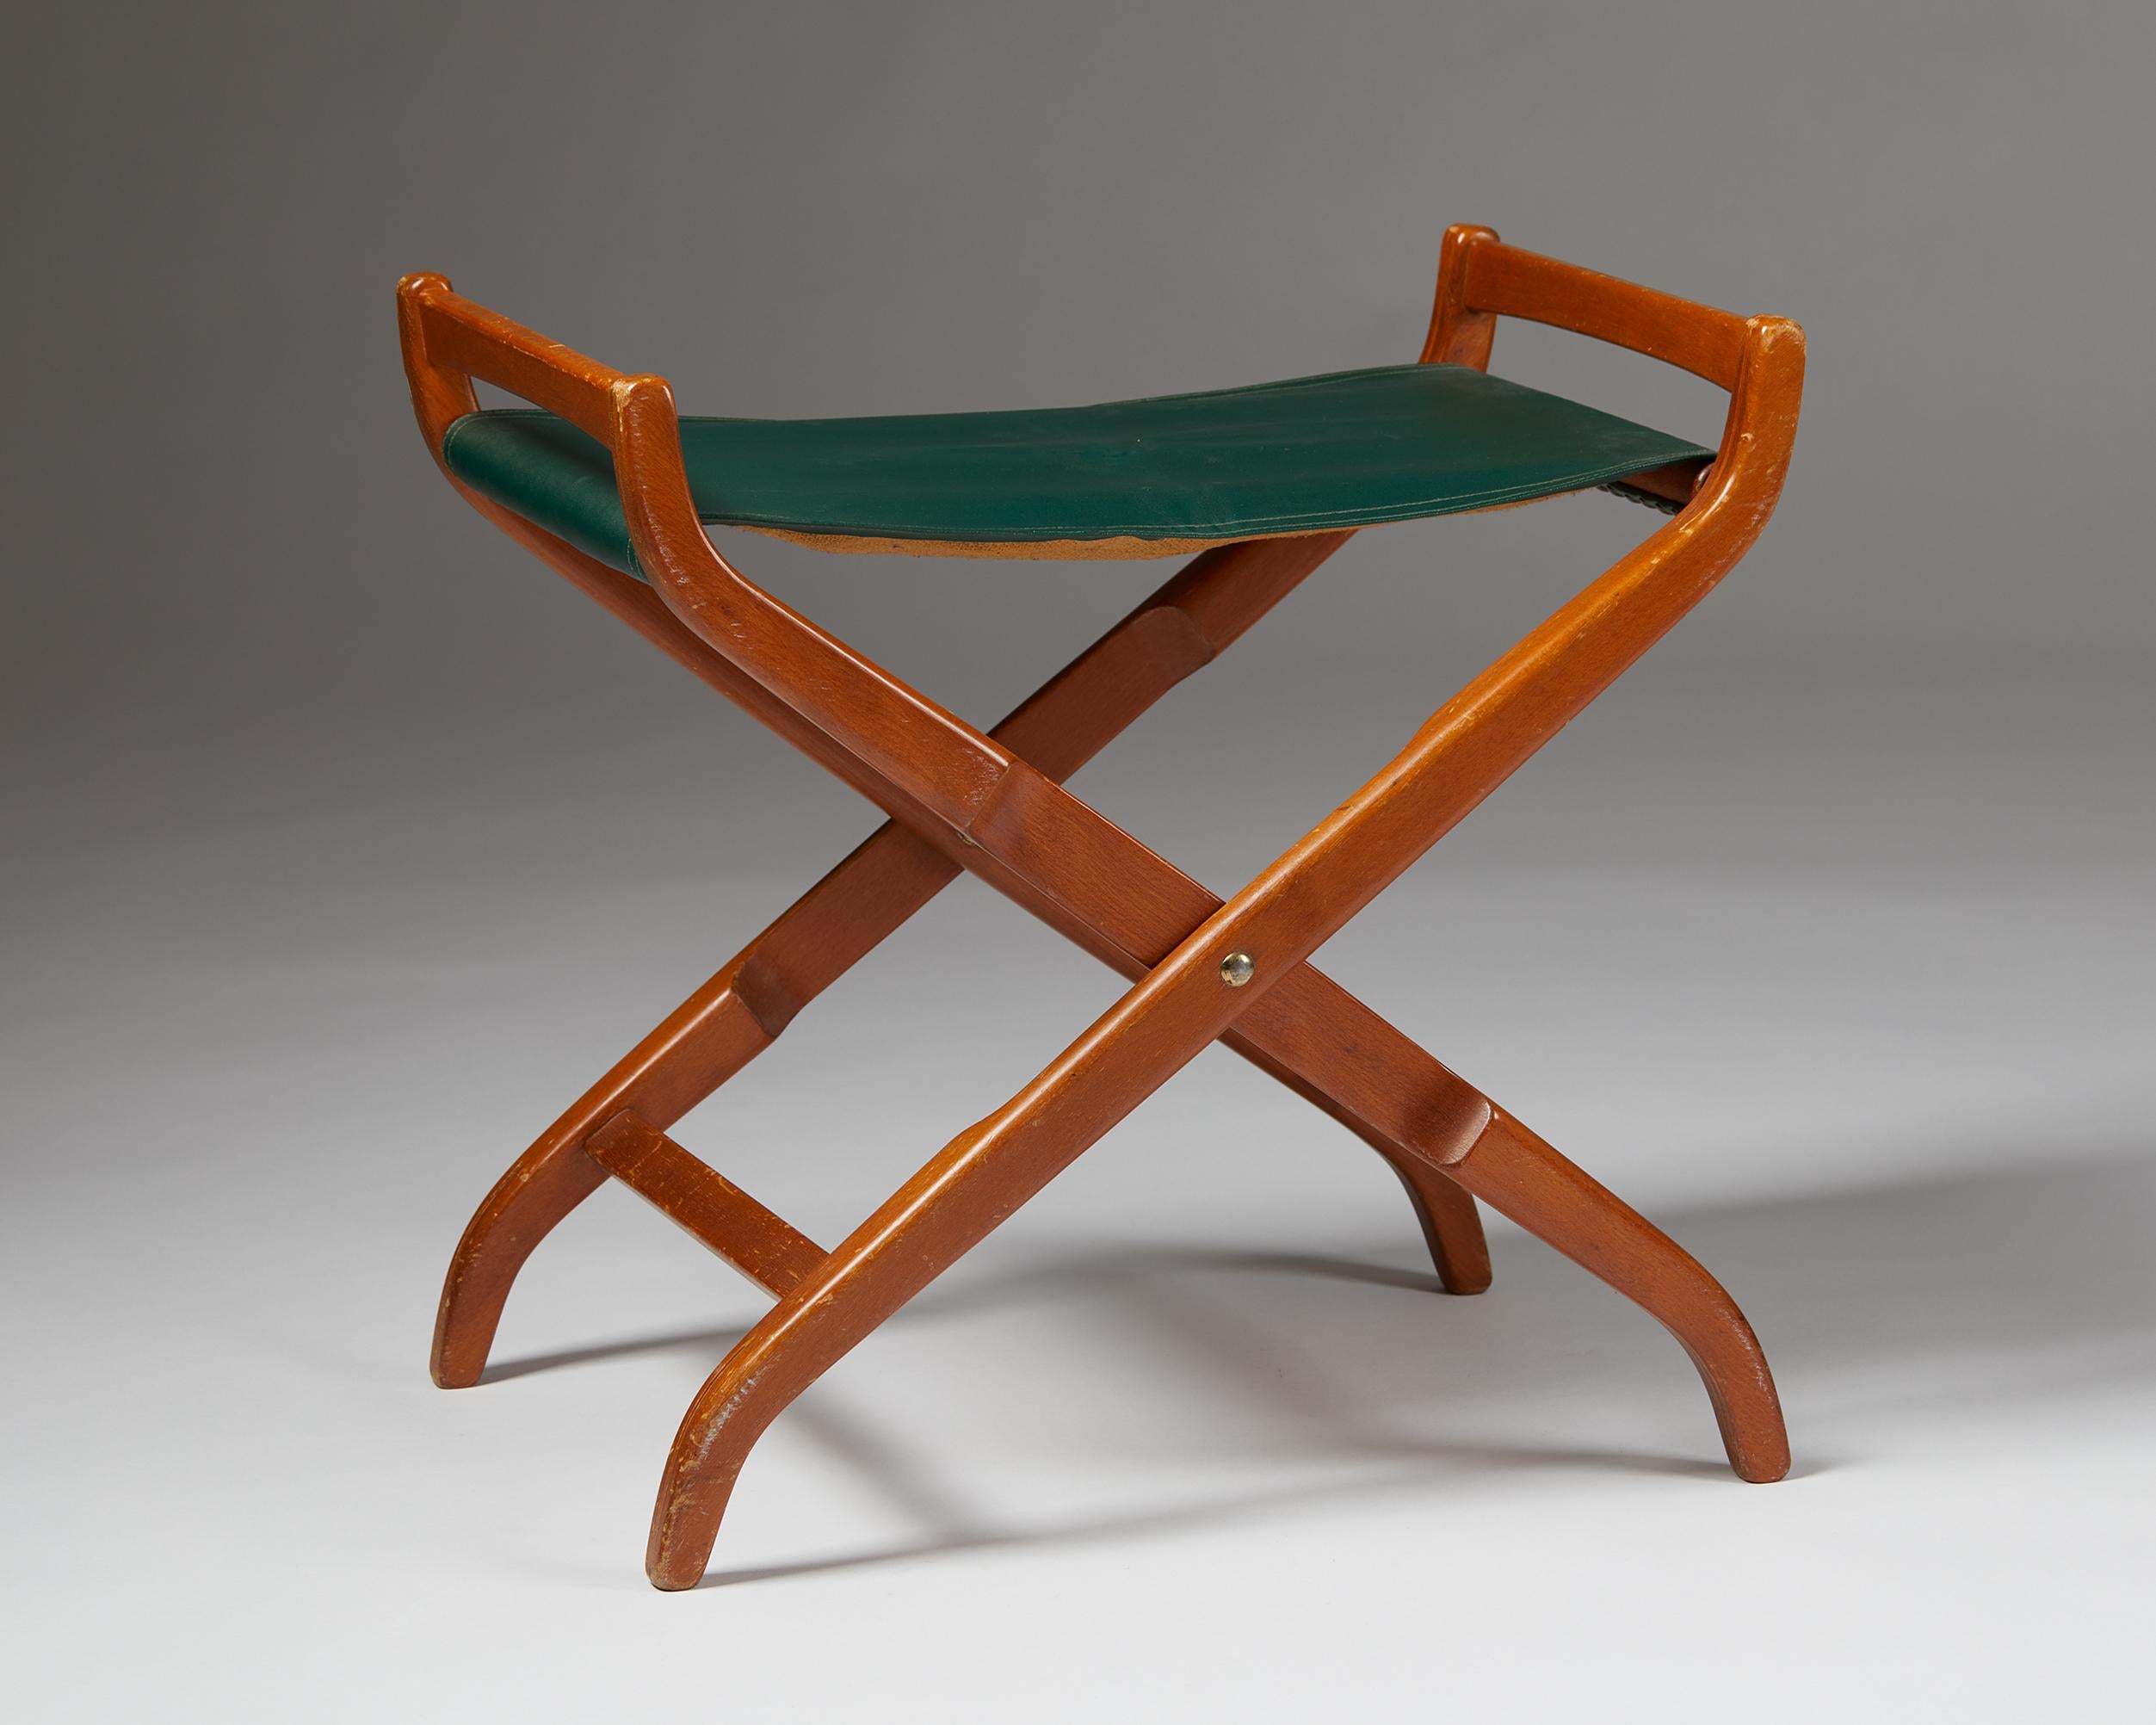 Stool ‘Futura’ by David Rosen for Nordiska Kompaniet, Sweden. 1951.

Imitation leather and stained beech.

Measurements:
H: 53 cm/ 1' 8 7/8